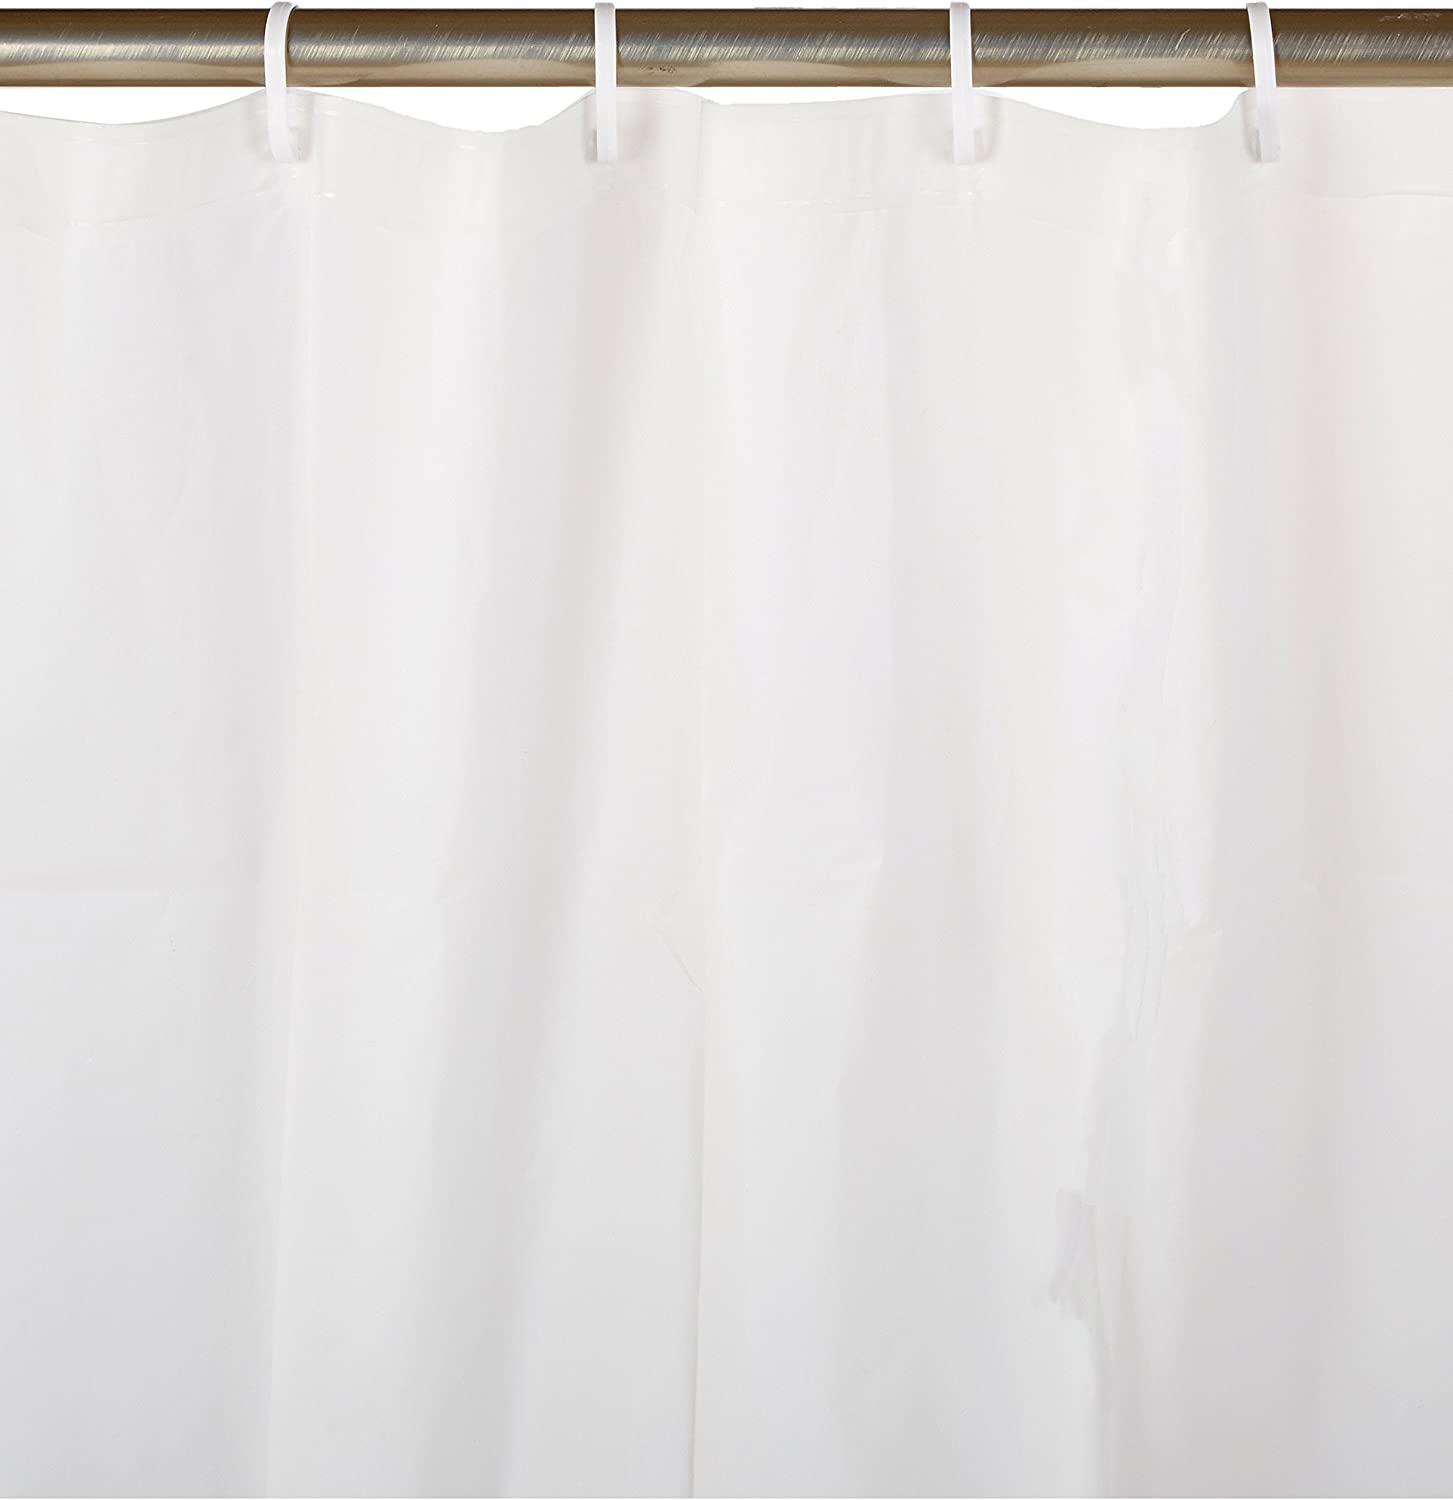 Shower Curtain Plastic with Hangers